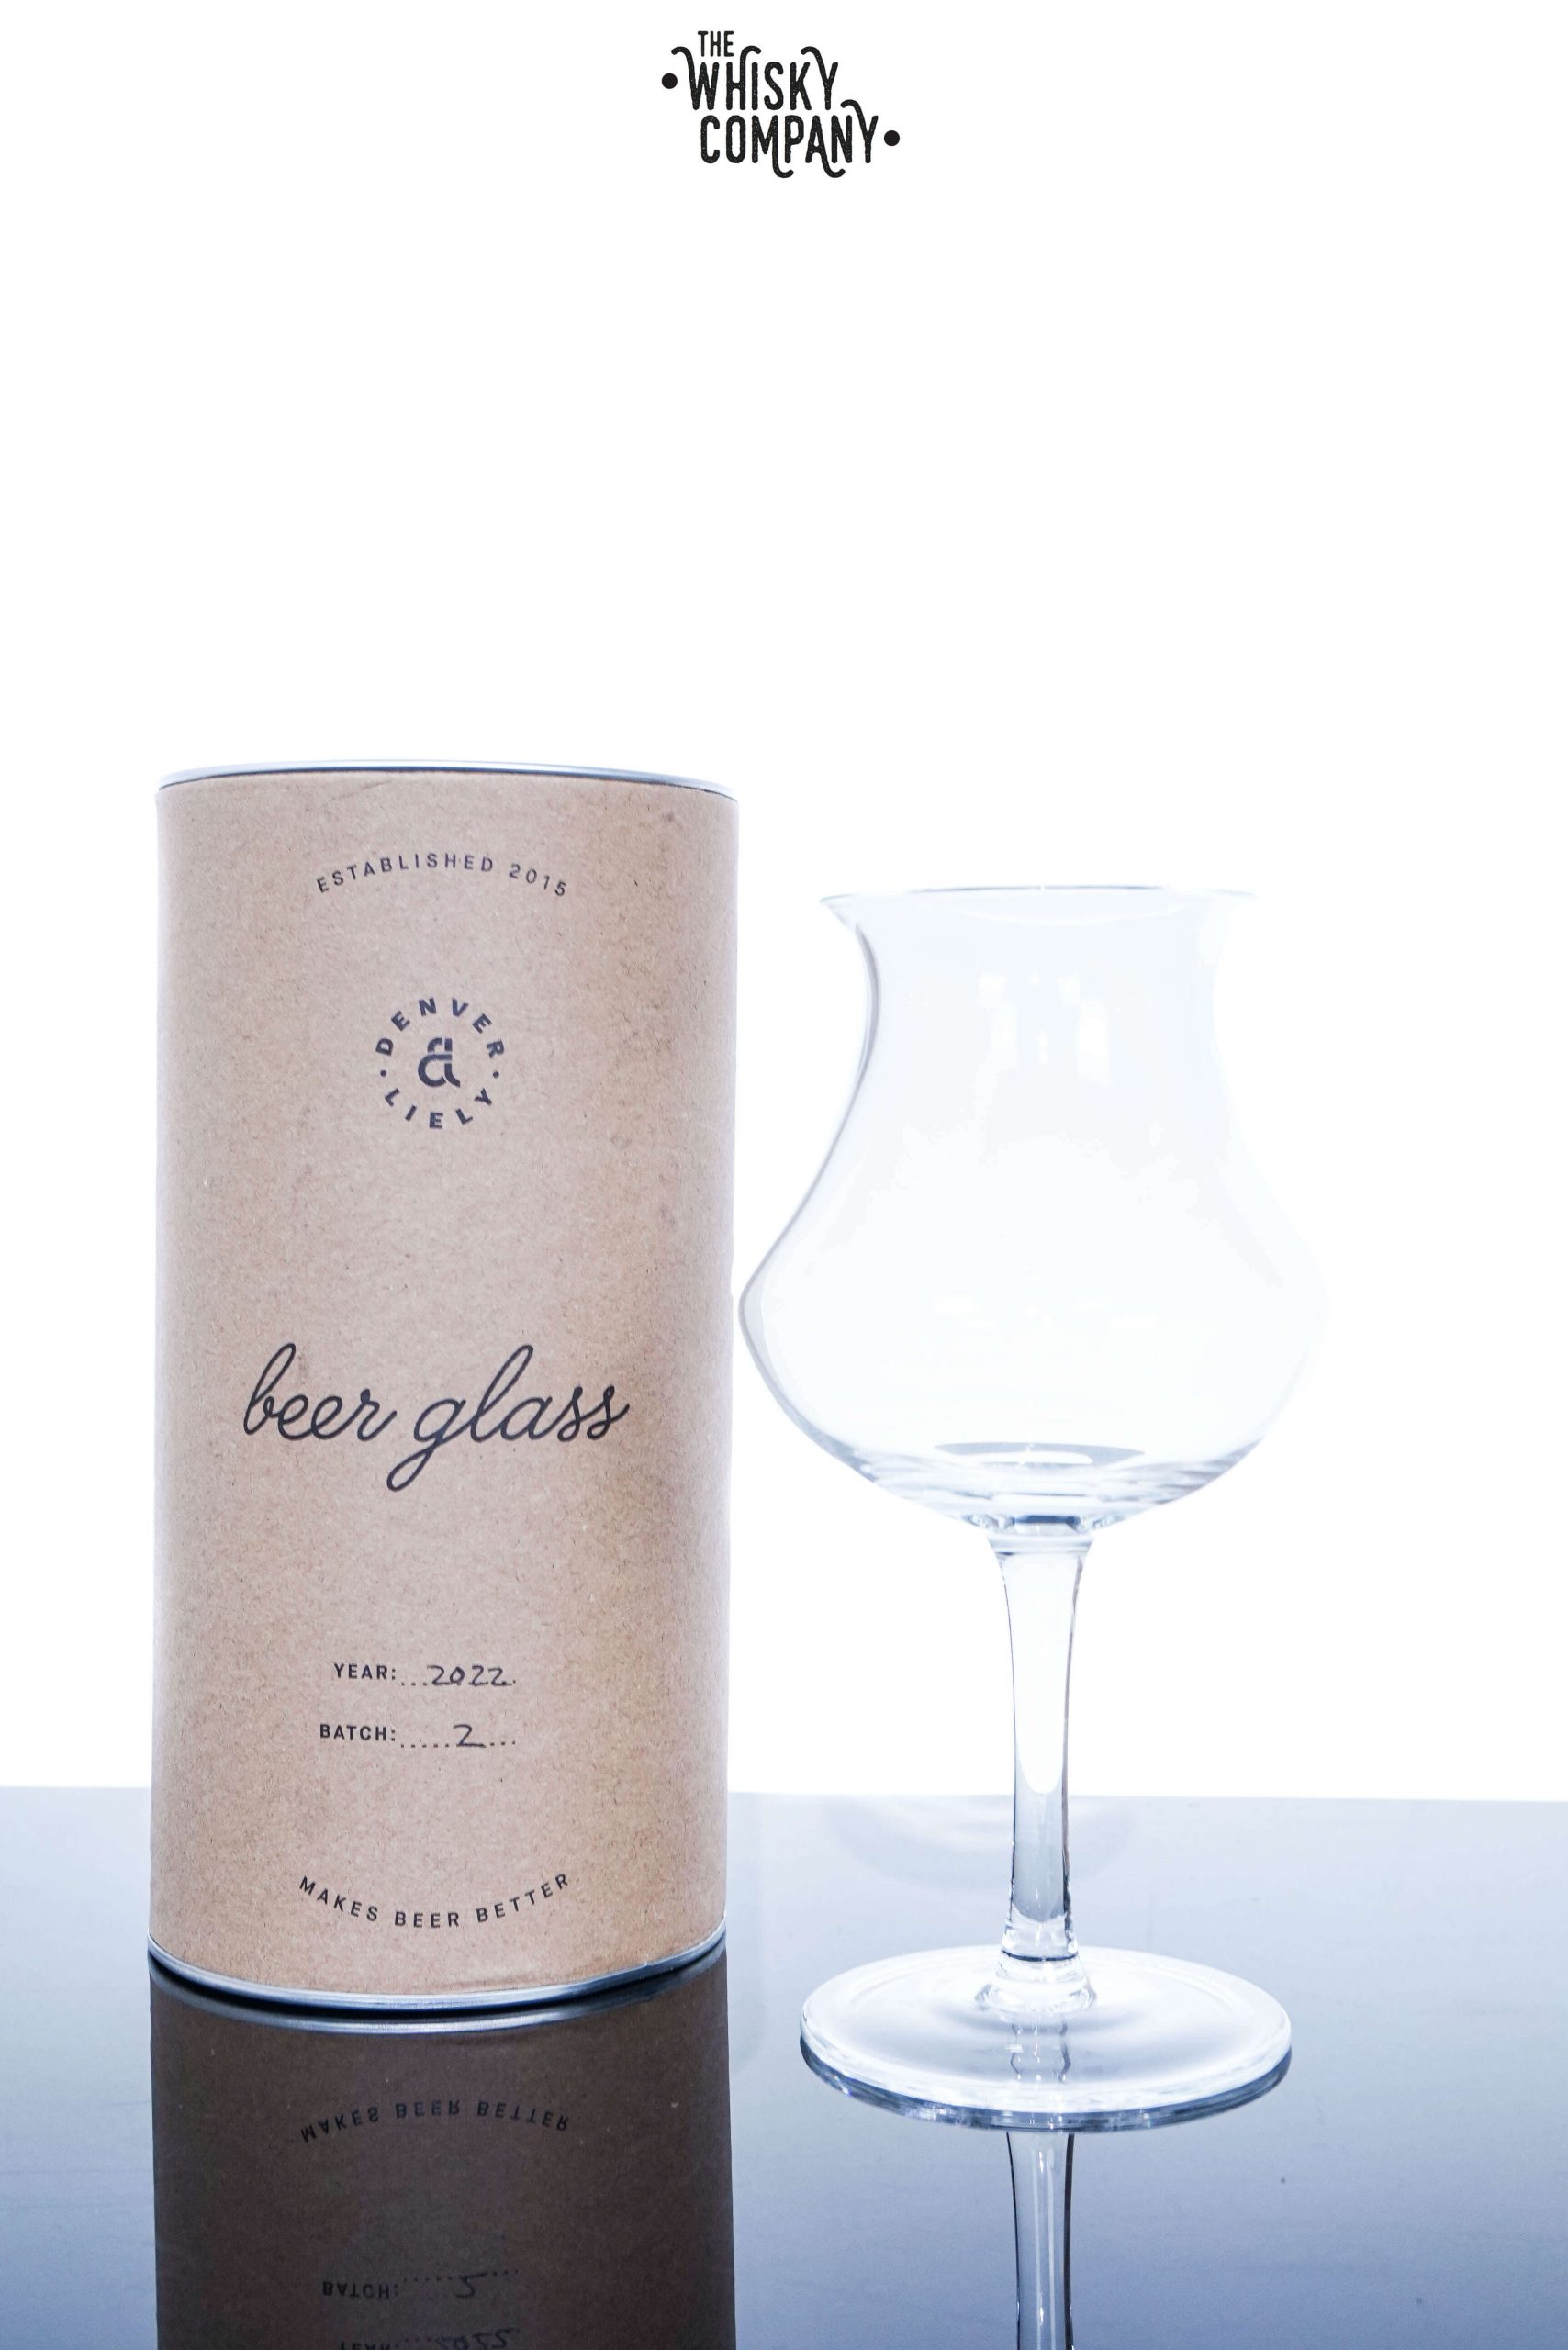 https://www.thewhiskycompany.com.au/wp-content/uploads/2022/11/the_whisky_company_denver__liely_beer_glass-scaled.jpg